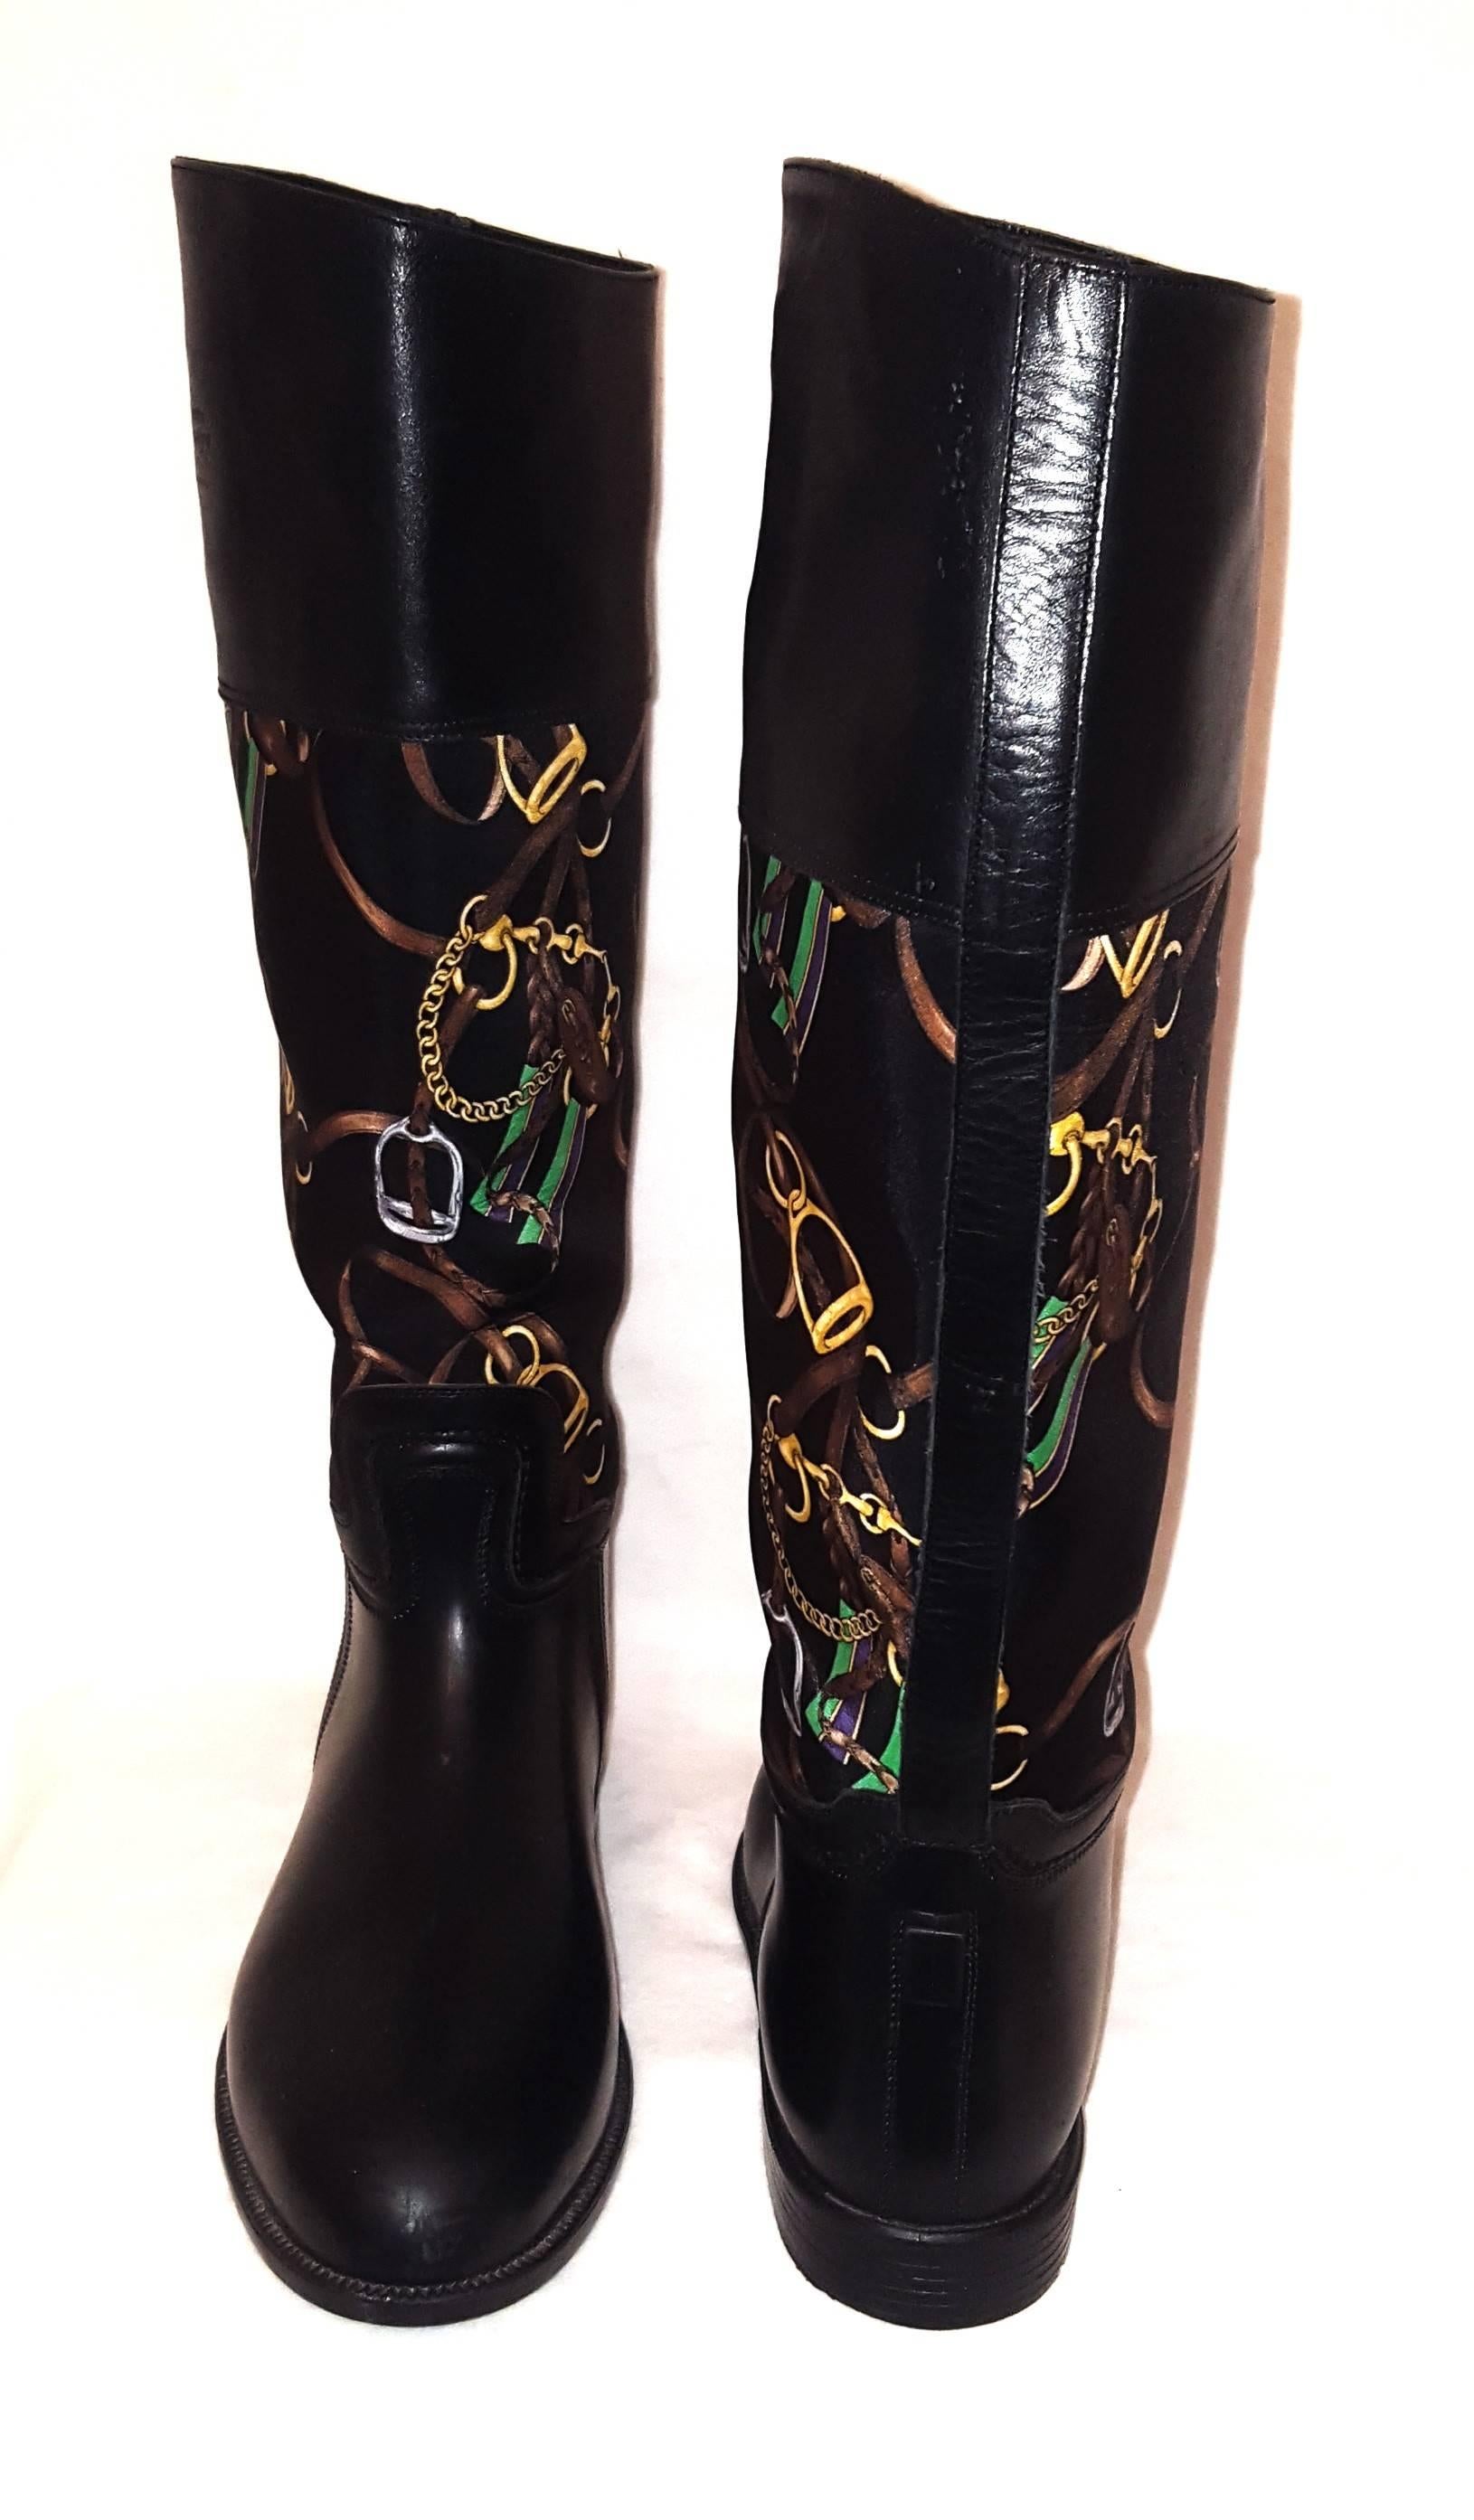 Ralph Lauren black knee high riding boots features equestrian theme fabric inserts on the shaft of these boots.  Ralph Lauren puts its mark on the equestrian aesthetic with the overall design of the fabric with the equestrian accessories, horse